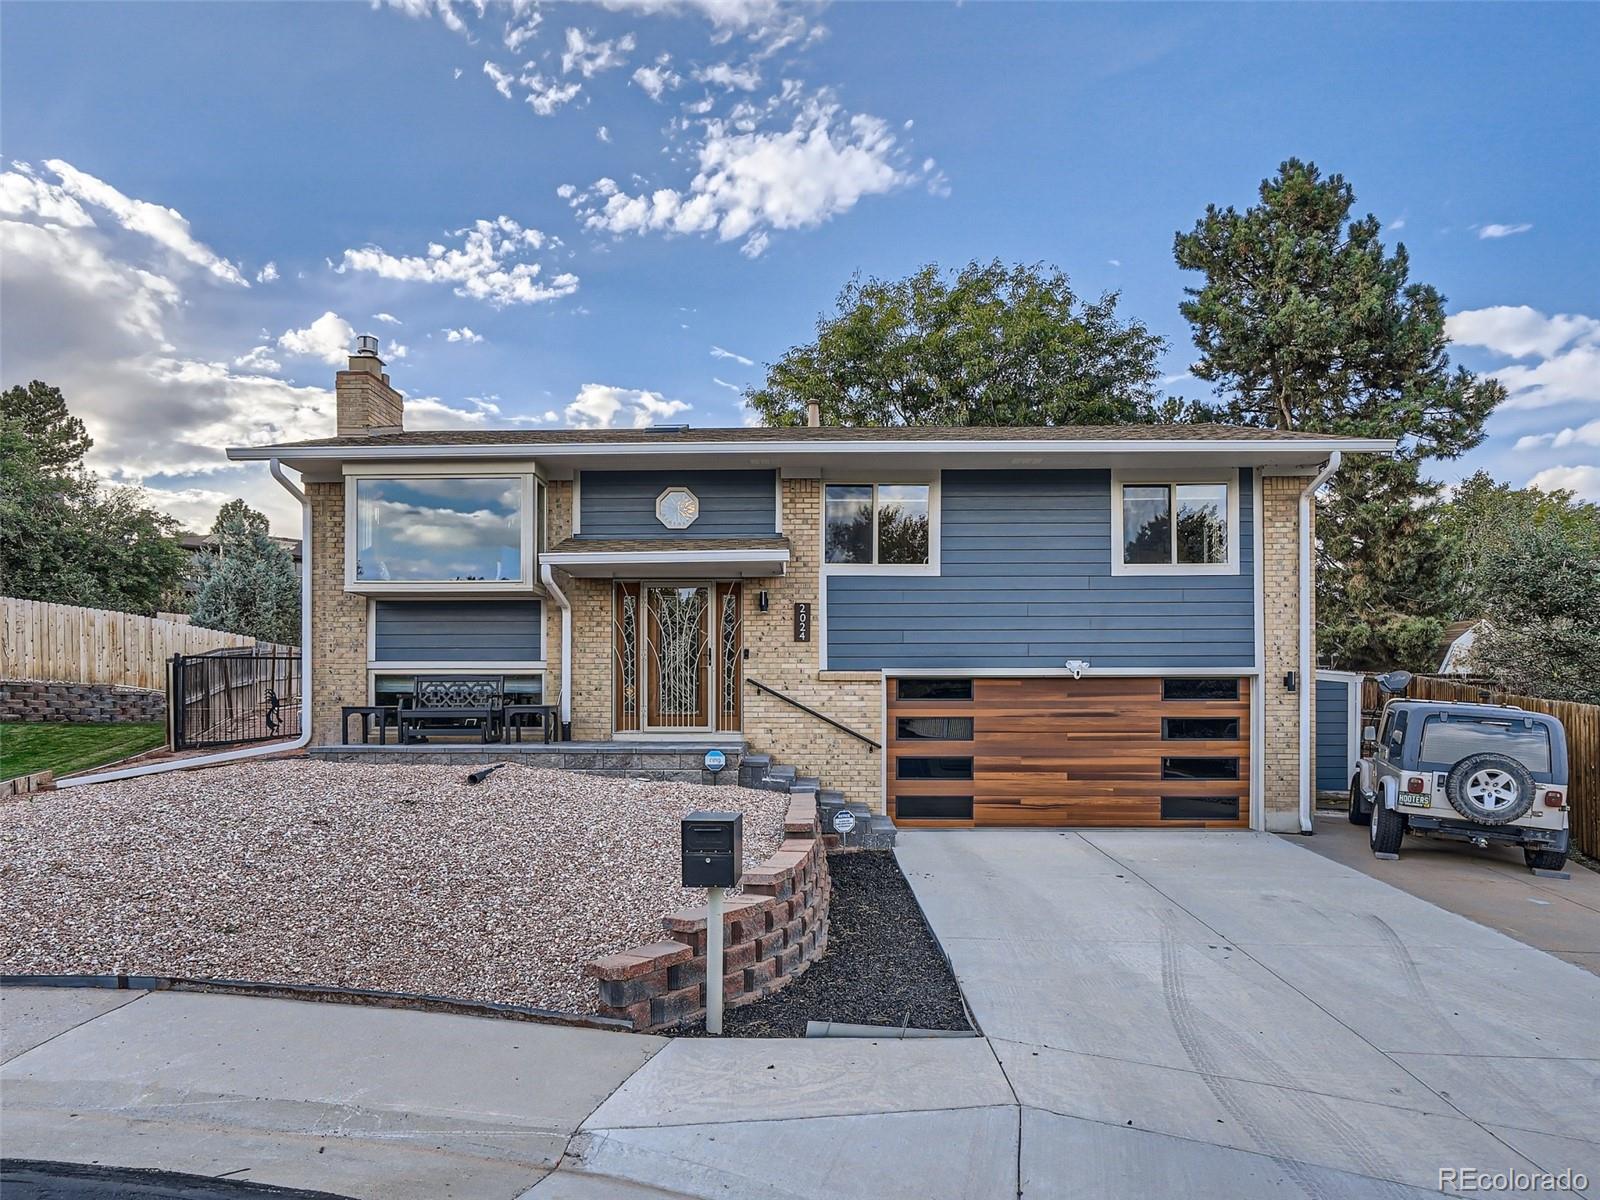 Report Image for 2024 S Xenon Court,Lakewood, Colorado